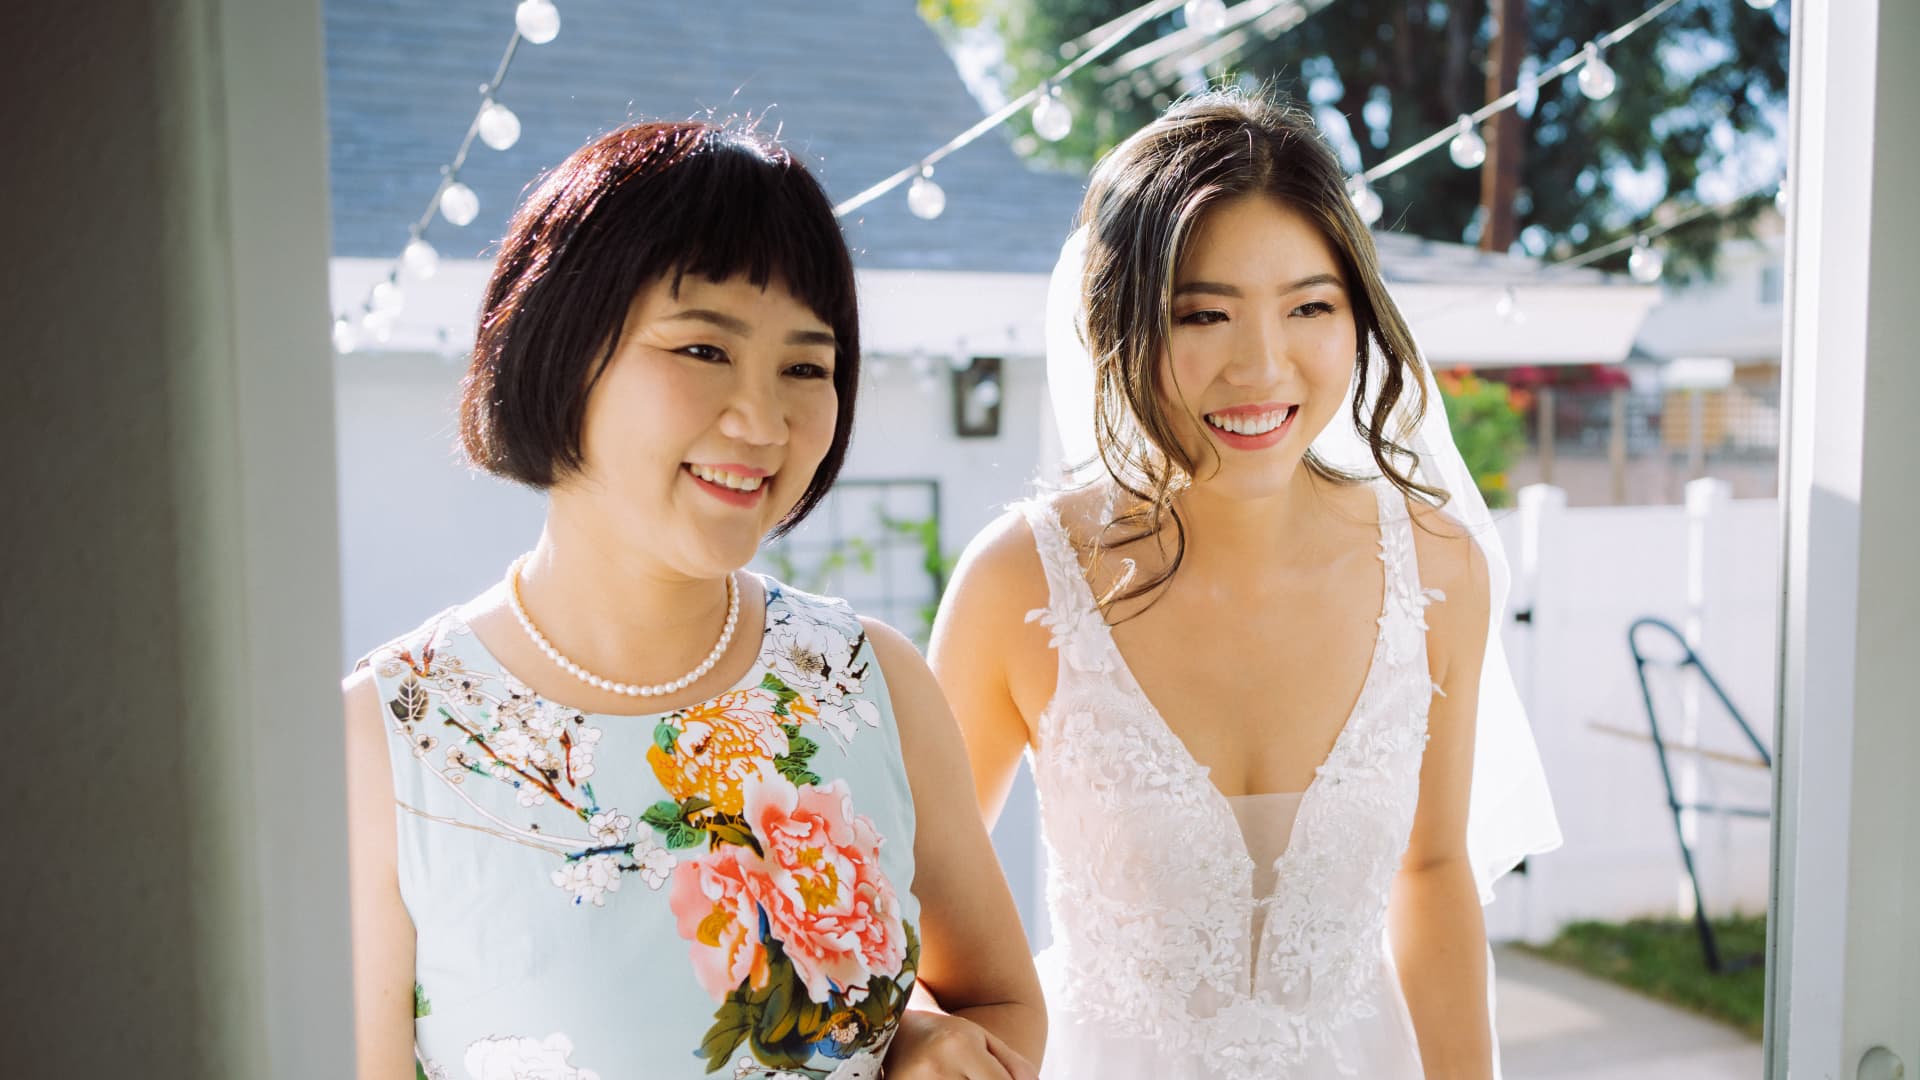 Kim Liao (R) and her mother on her wedding day.